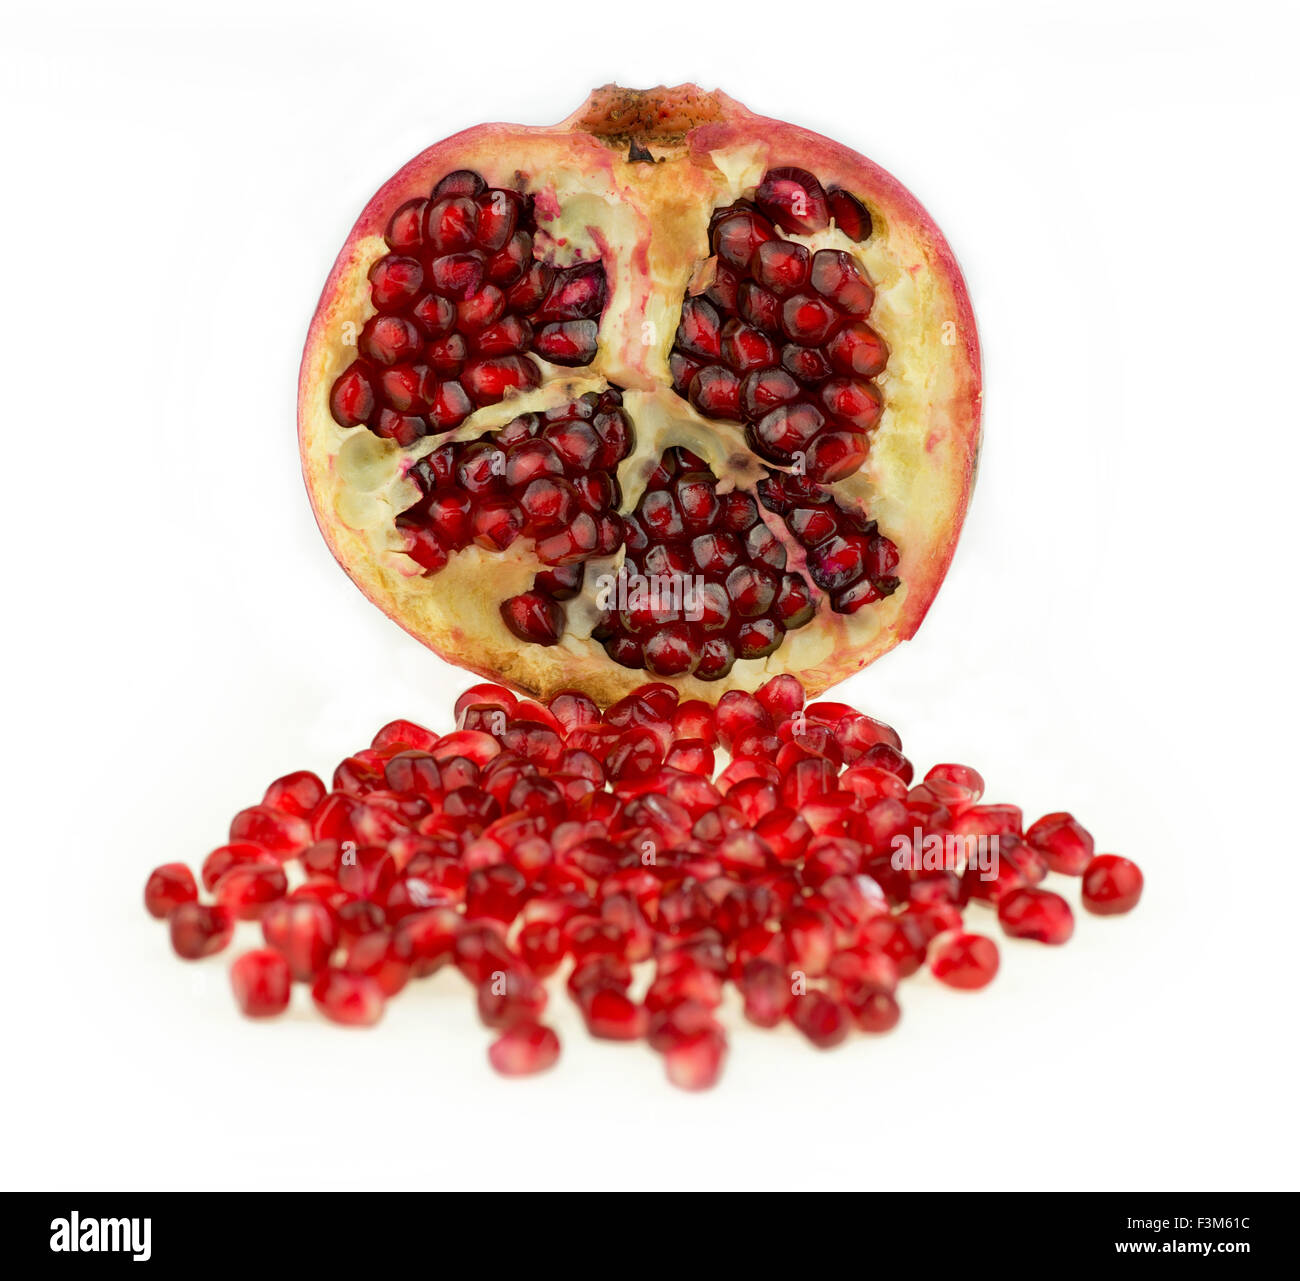 Pomegranate cut in half with seeds spilling out, isolated on a white background Stock Photo